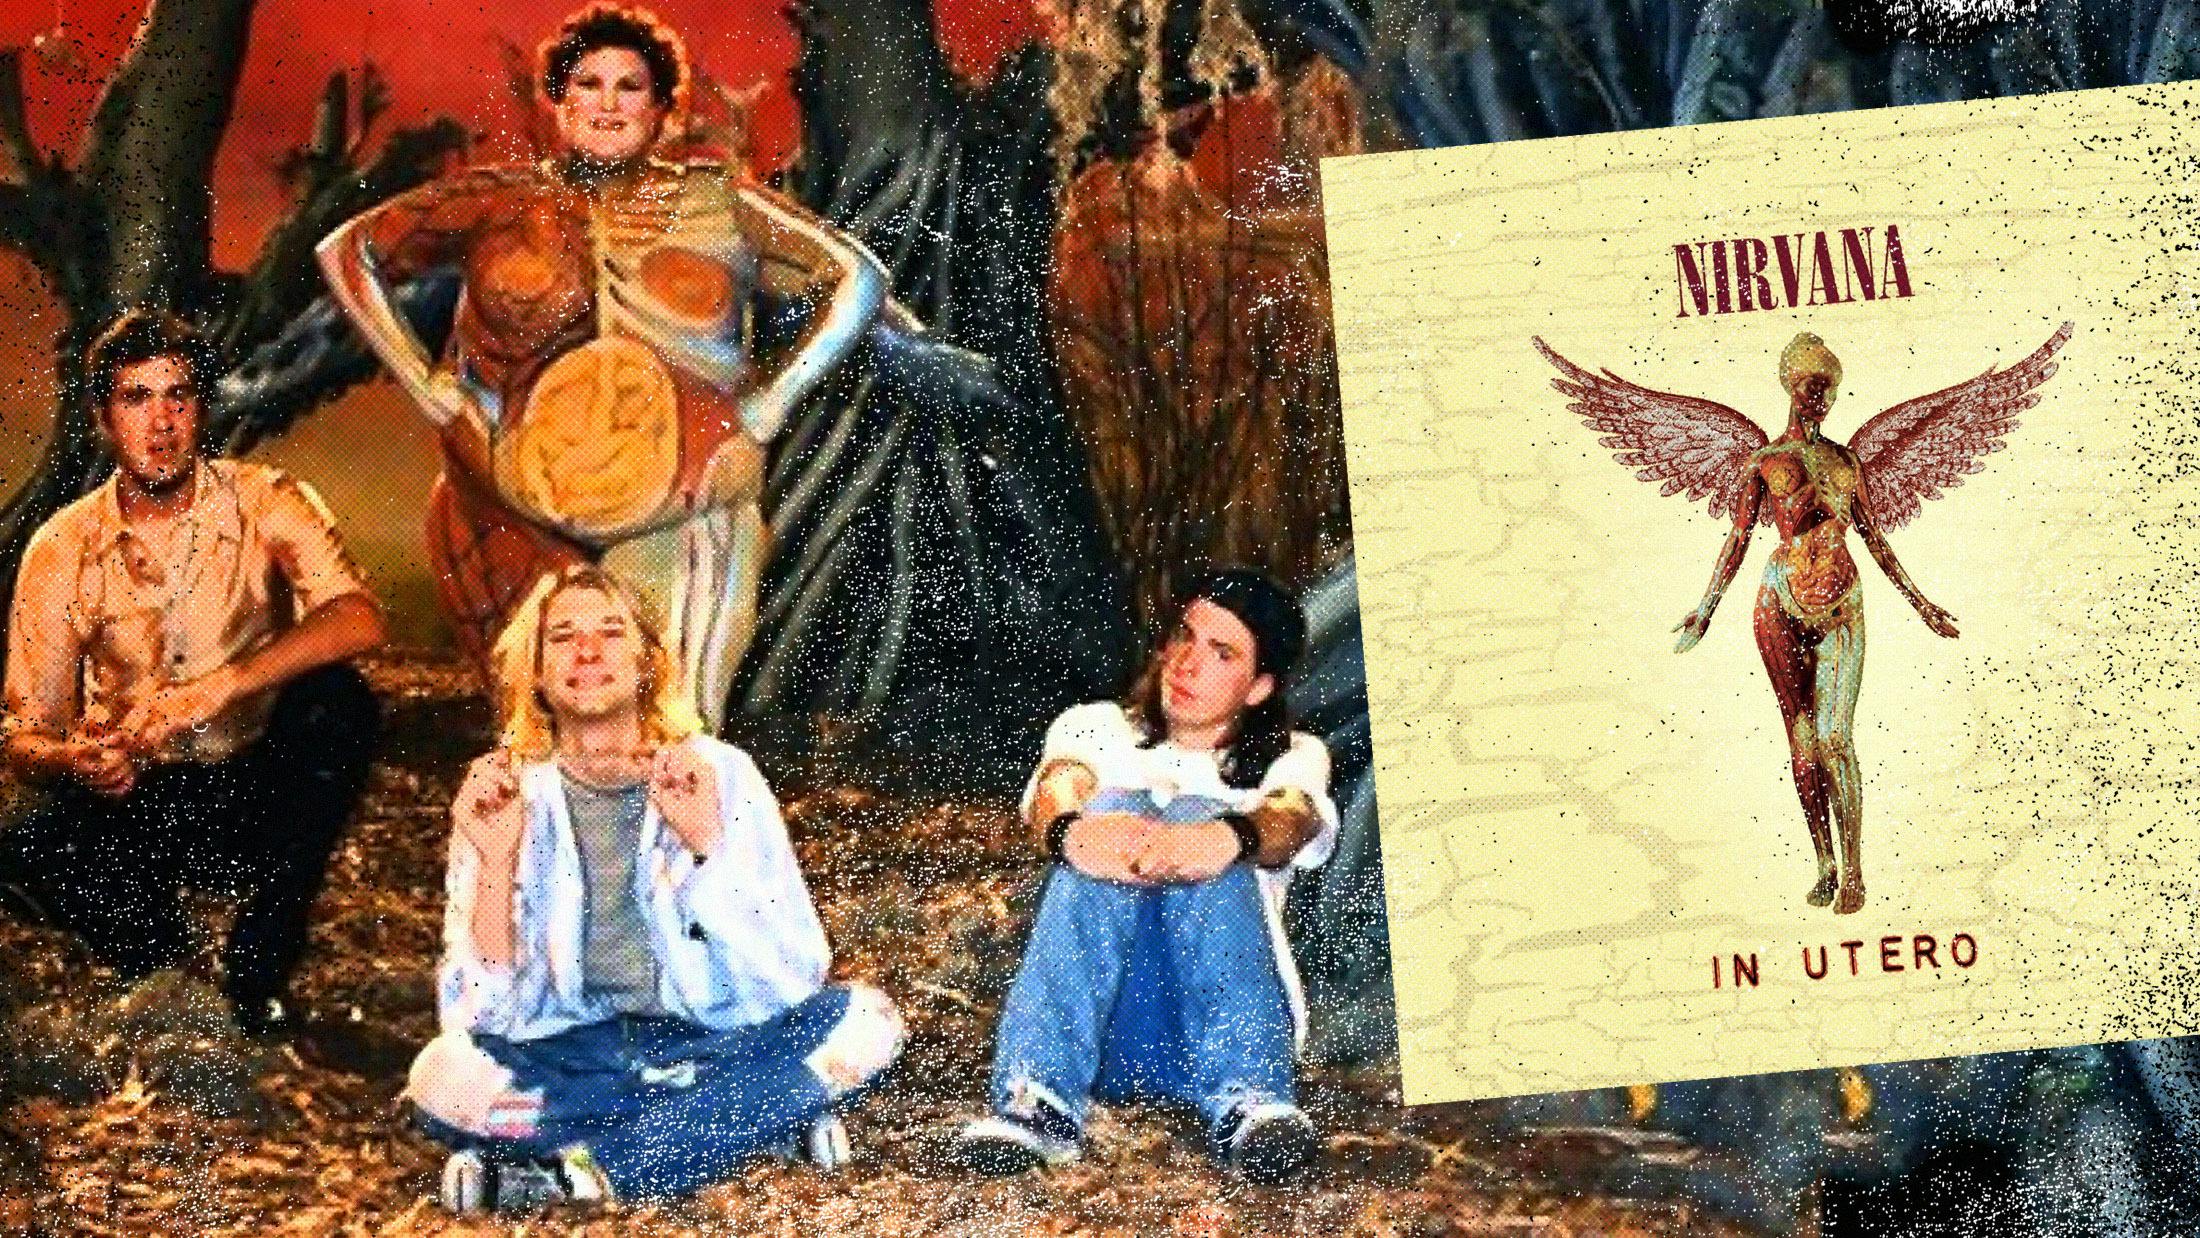 "This is the sound of absolution": Our original 1993 review of Nirvana's In Utero